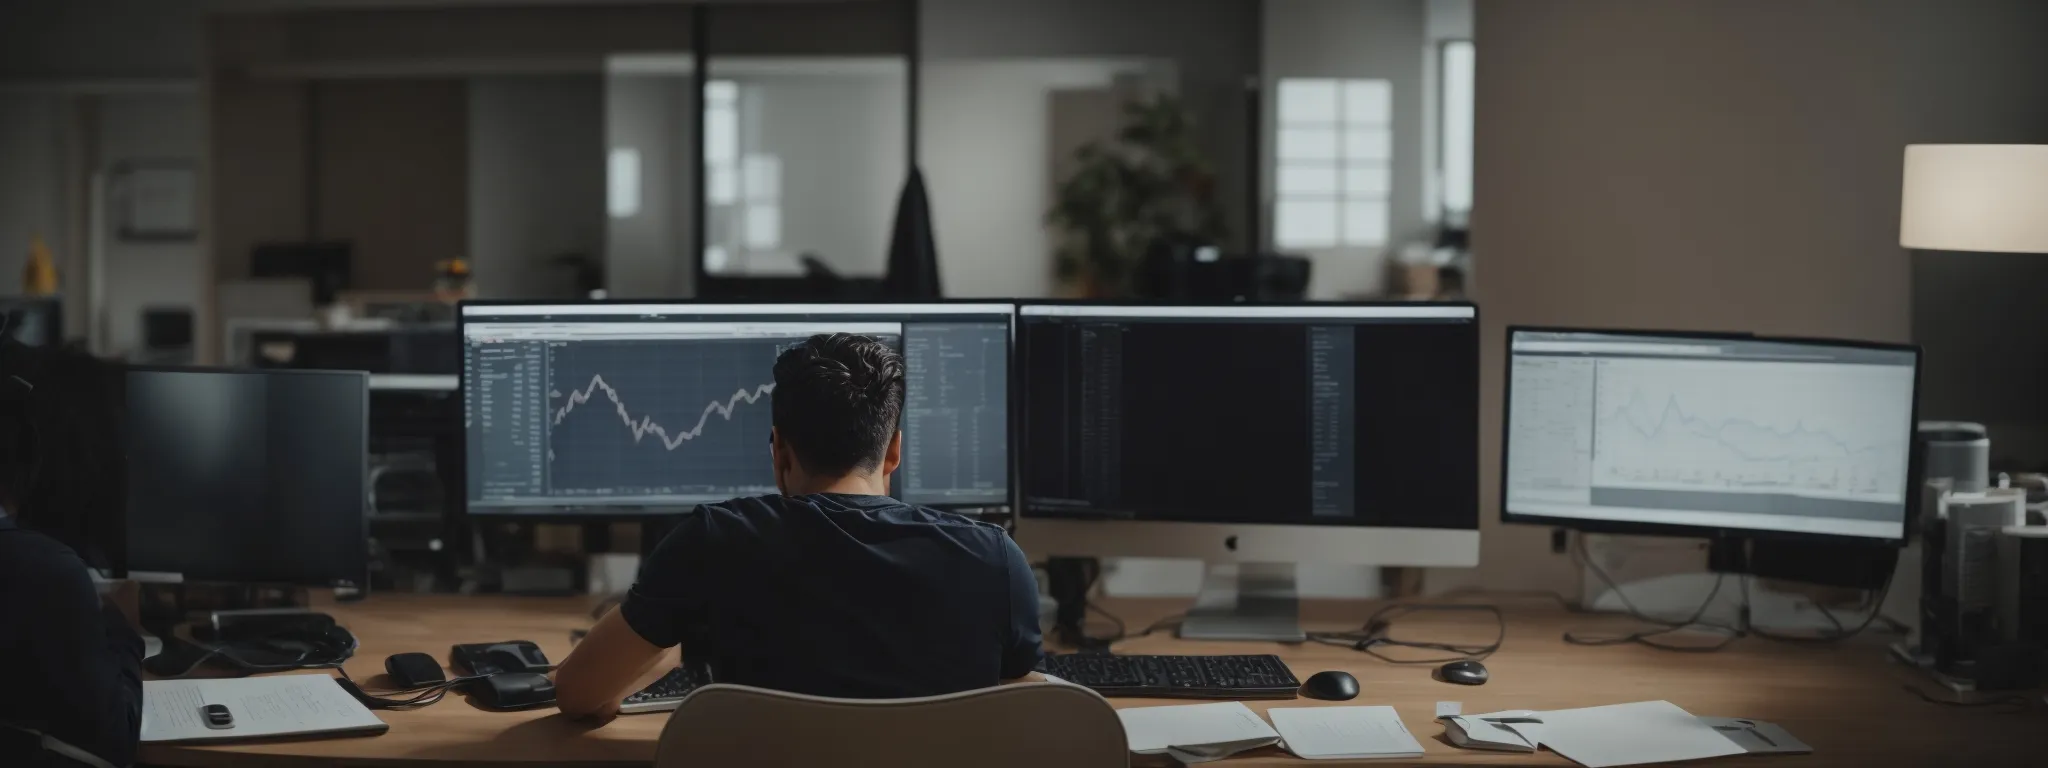 a focused individual sits intently at a modern desk, navigating through advanced digital marketing analytics on a sleek, high-resolution computer screen.